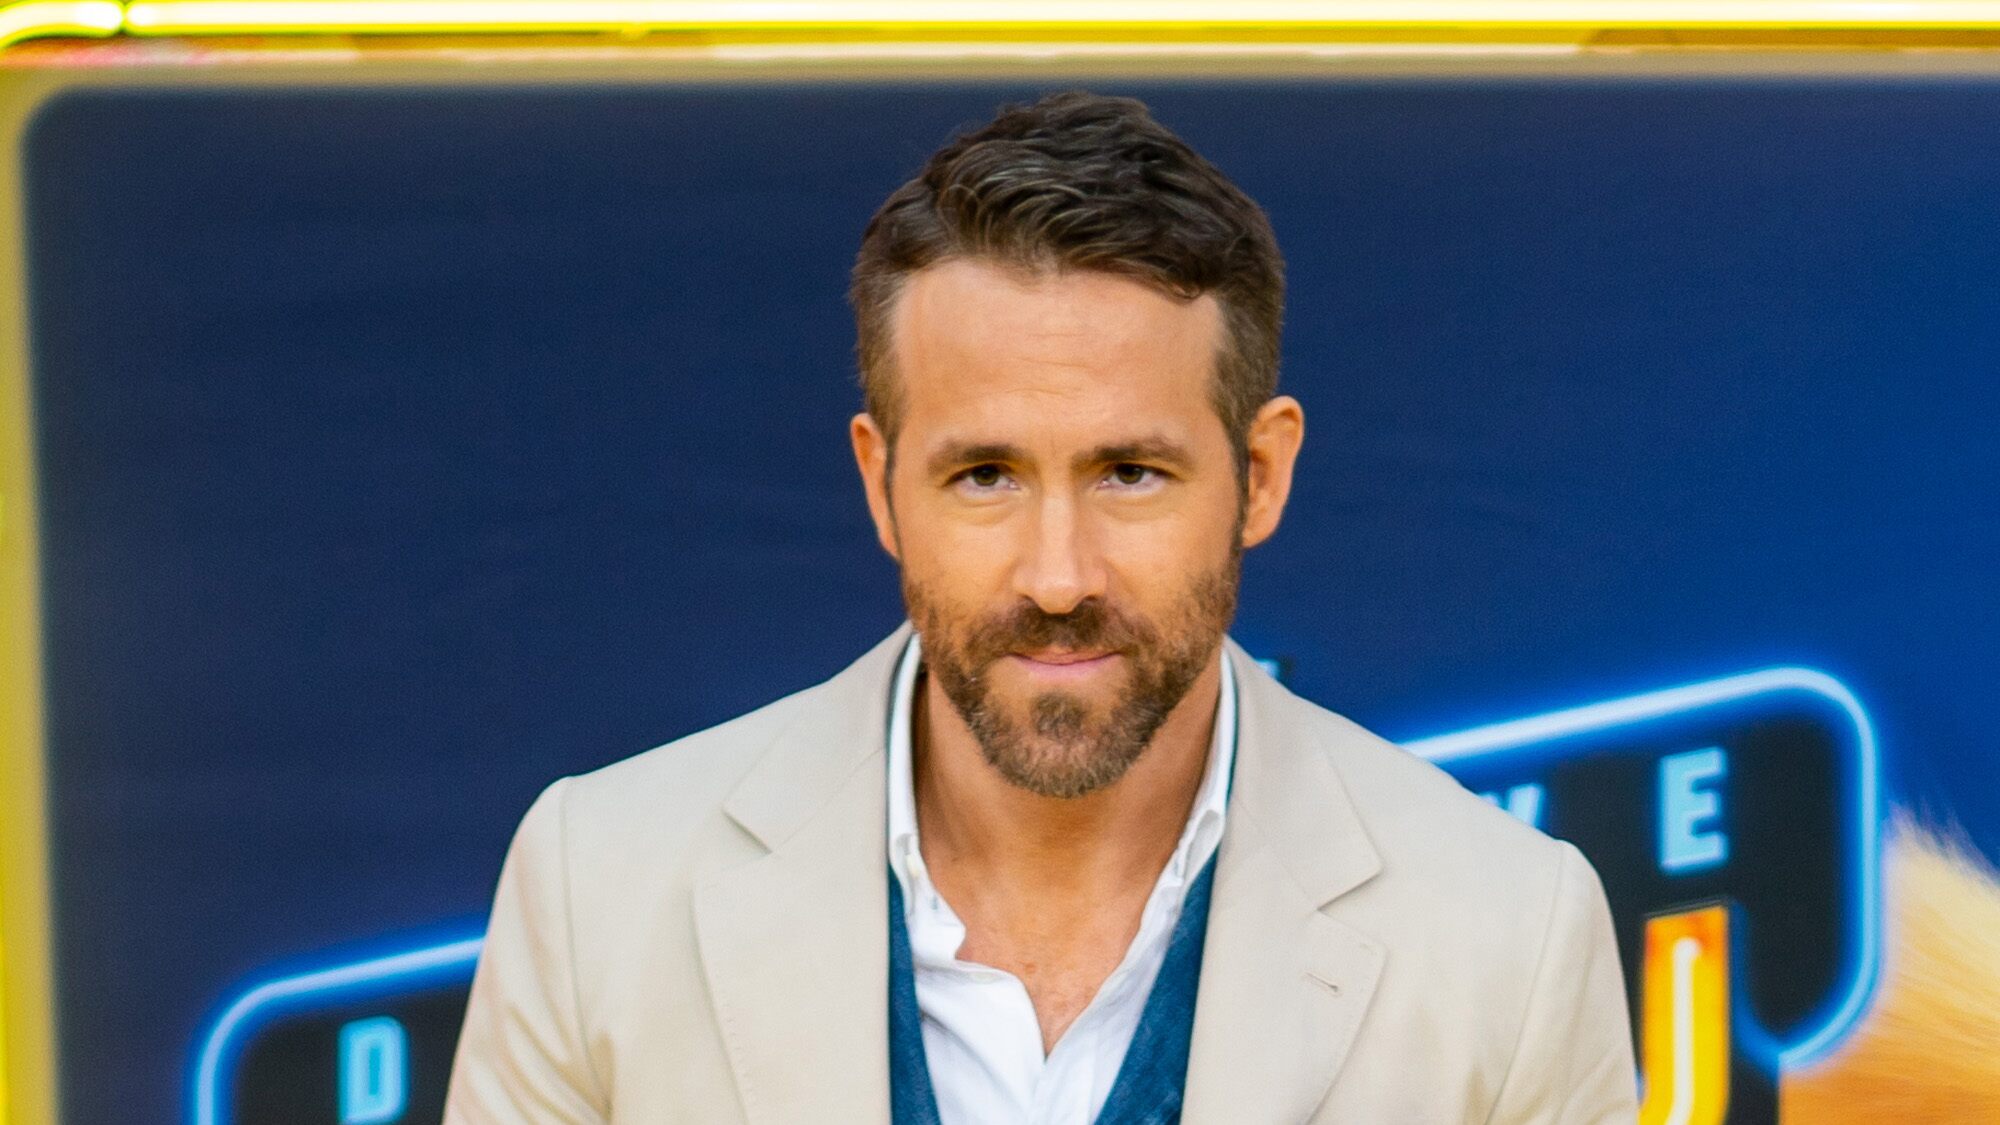 Ryan Reynolds has hilarious out of office message after selling Aviation gin for $610 Million